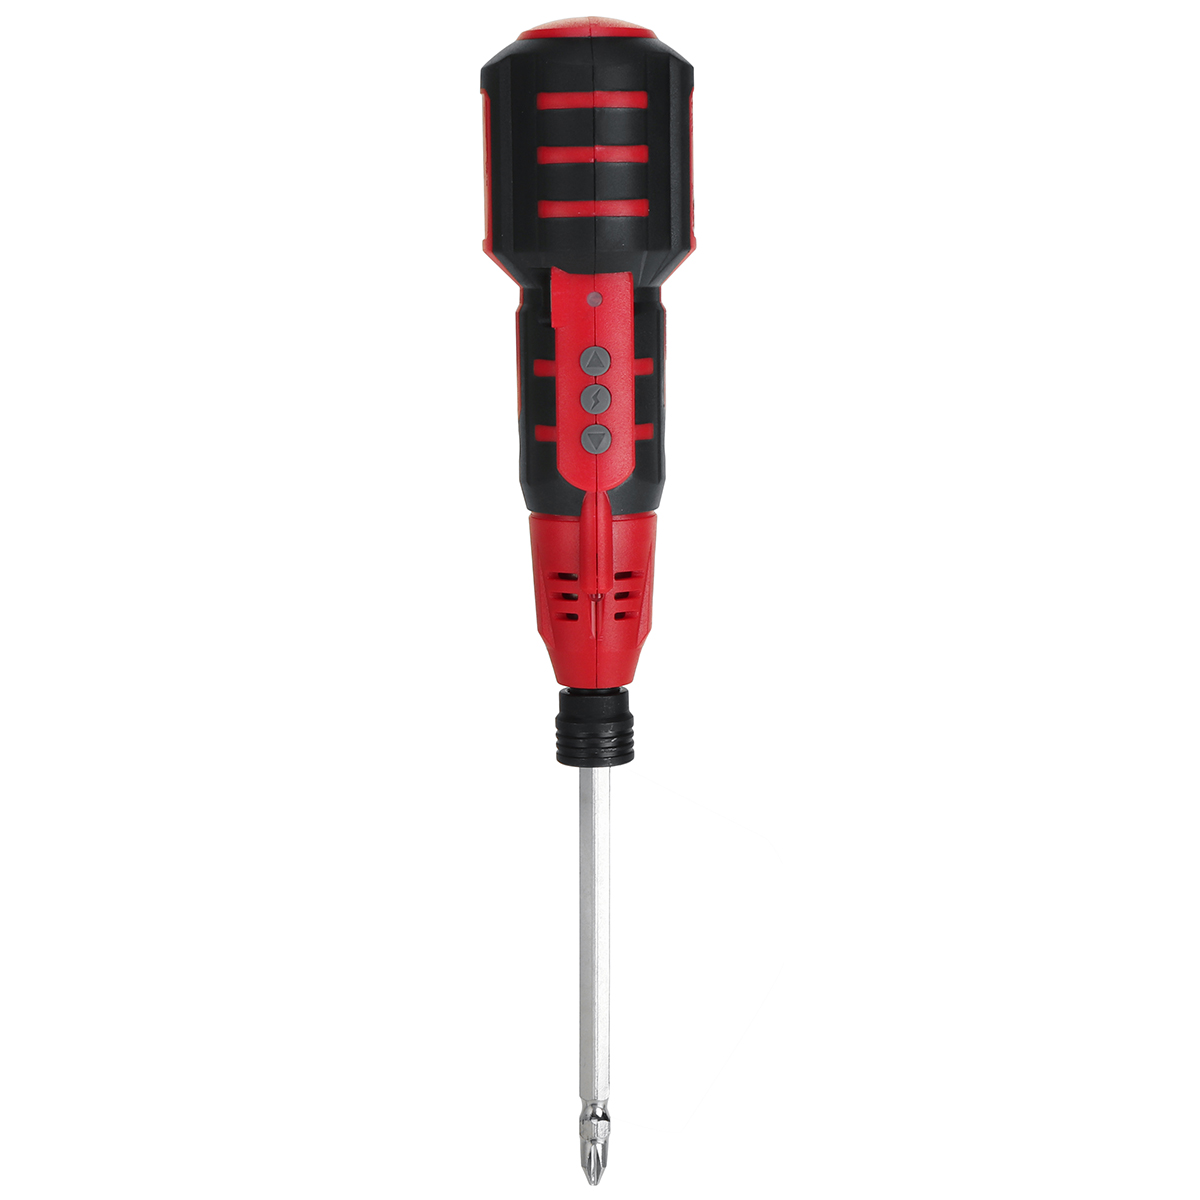 Cordless-Electric-Screwdriver-Set-Electric-Drill-USB-Rechargeable-Handle-With-LED-Light-1913246-6